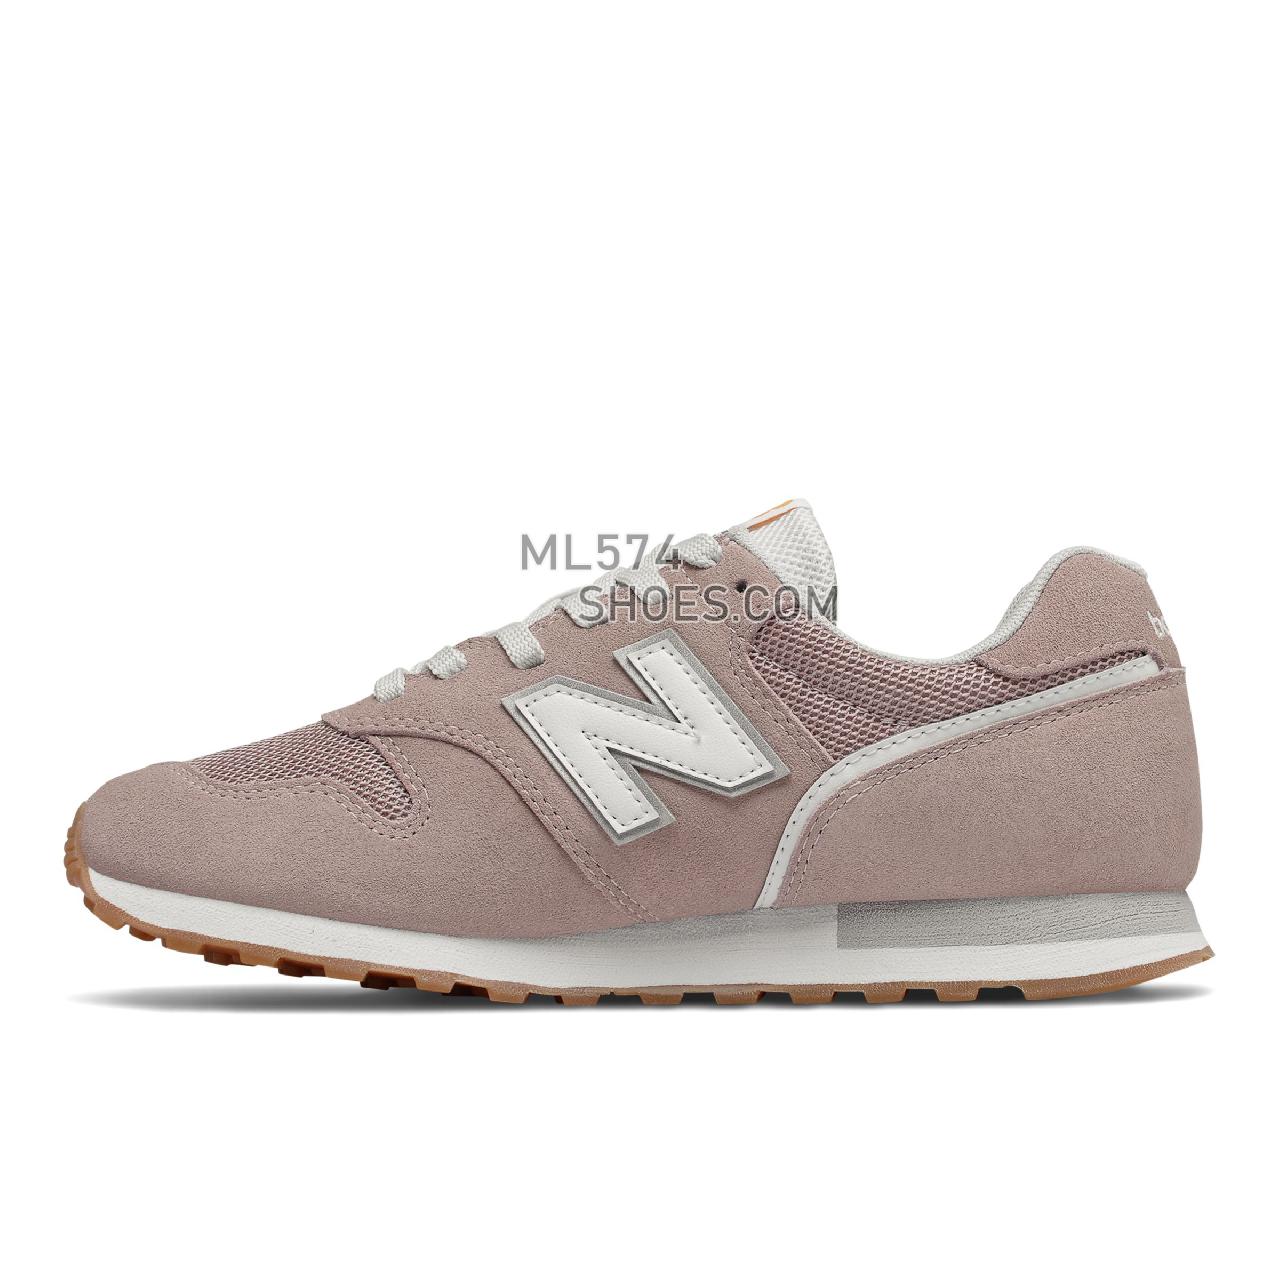 New Balance 373V2 - Women's Classic Sneakers - Au Lait with White - WL373HR2